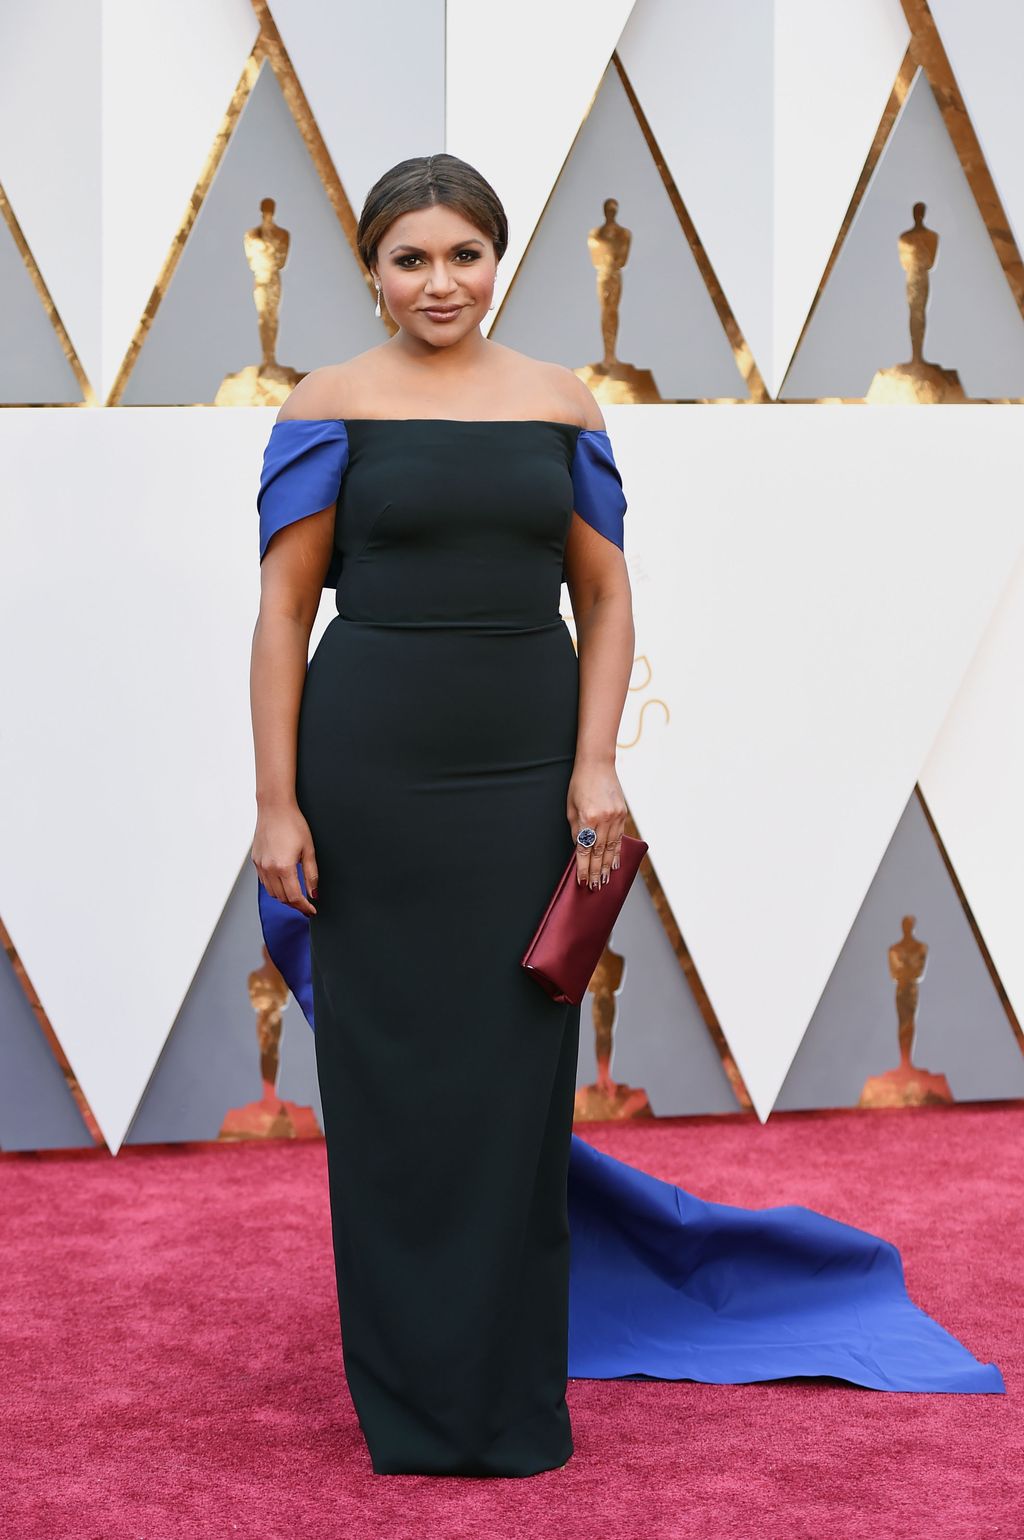 HOLLYWOOD, CA - FEBRUARY 28:  Actress Mindy Kaling attends the 88th Annual Academy Awards at Hollywood & Highland Center on February 28, 2016 in Hollywood, California.  (Photo by Jason Merritt/Getty Images)